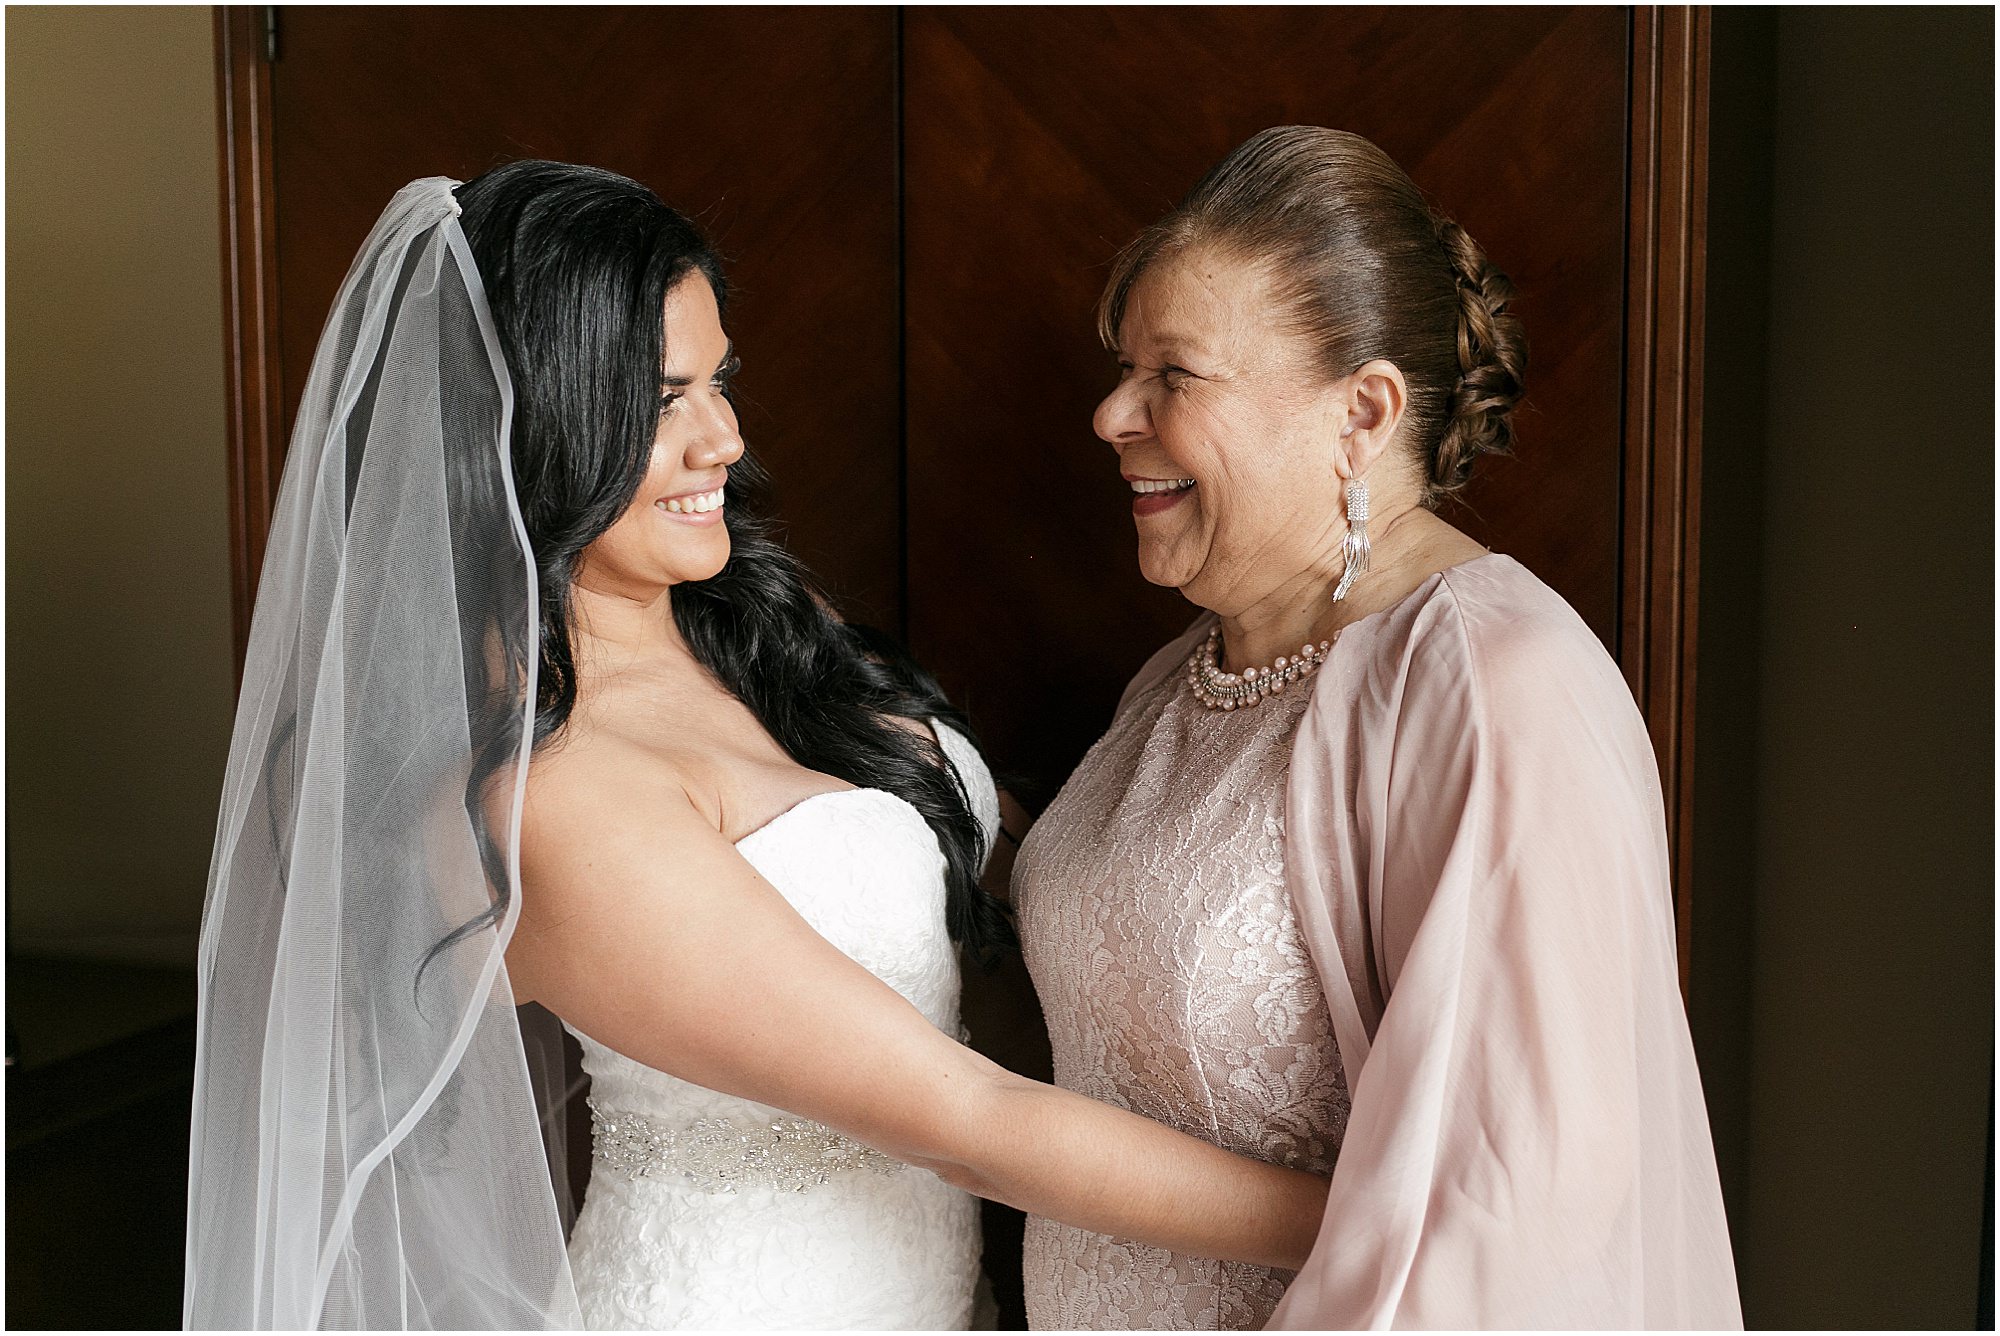 Bride looking at her grandmother and both smiling